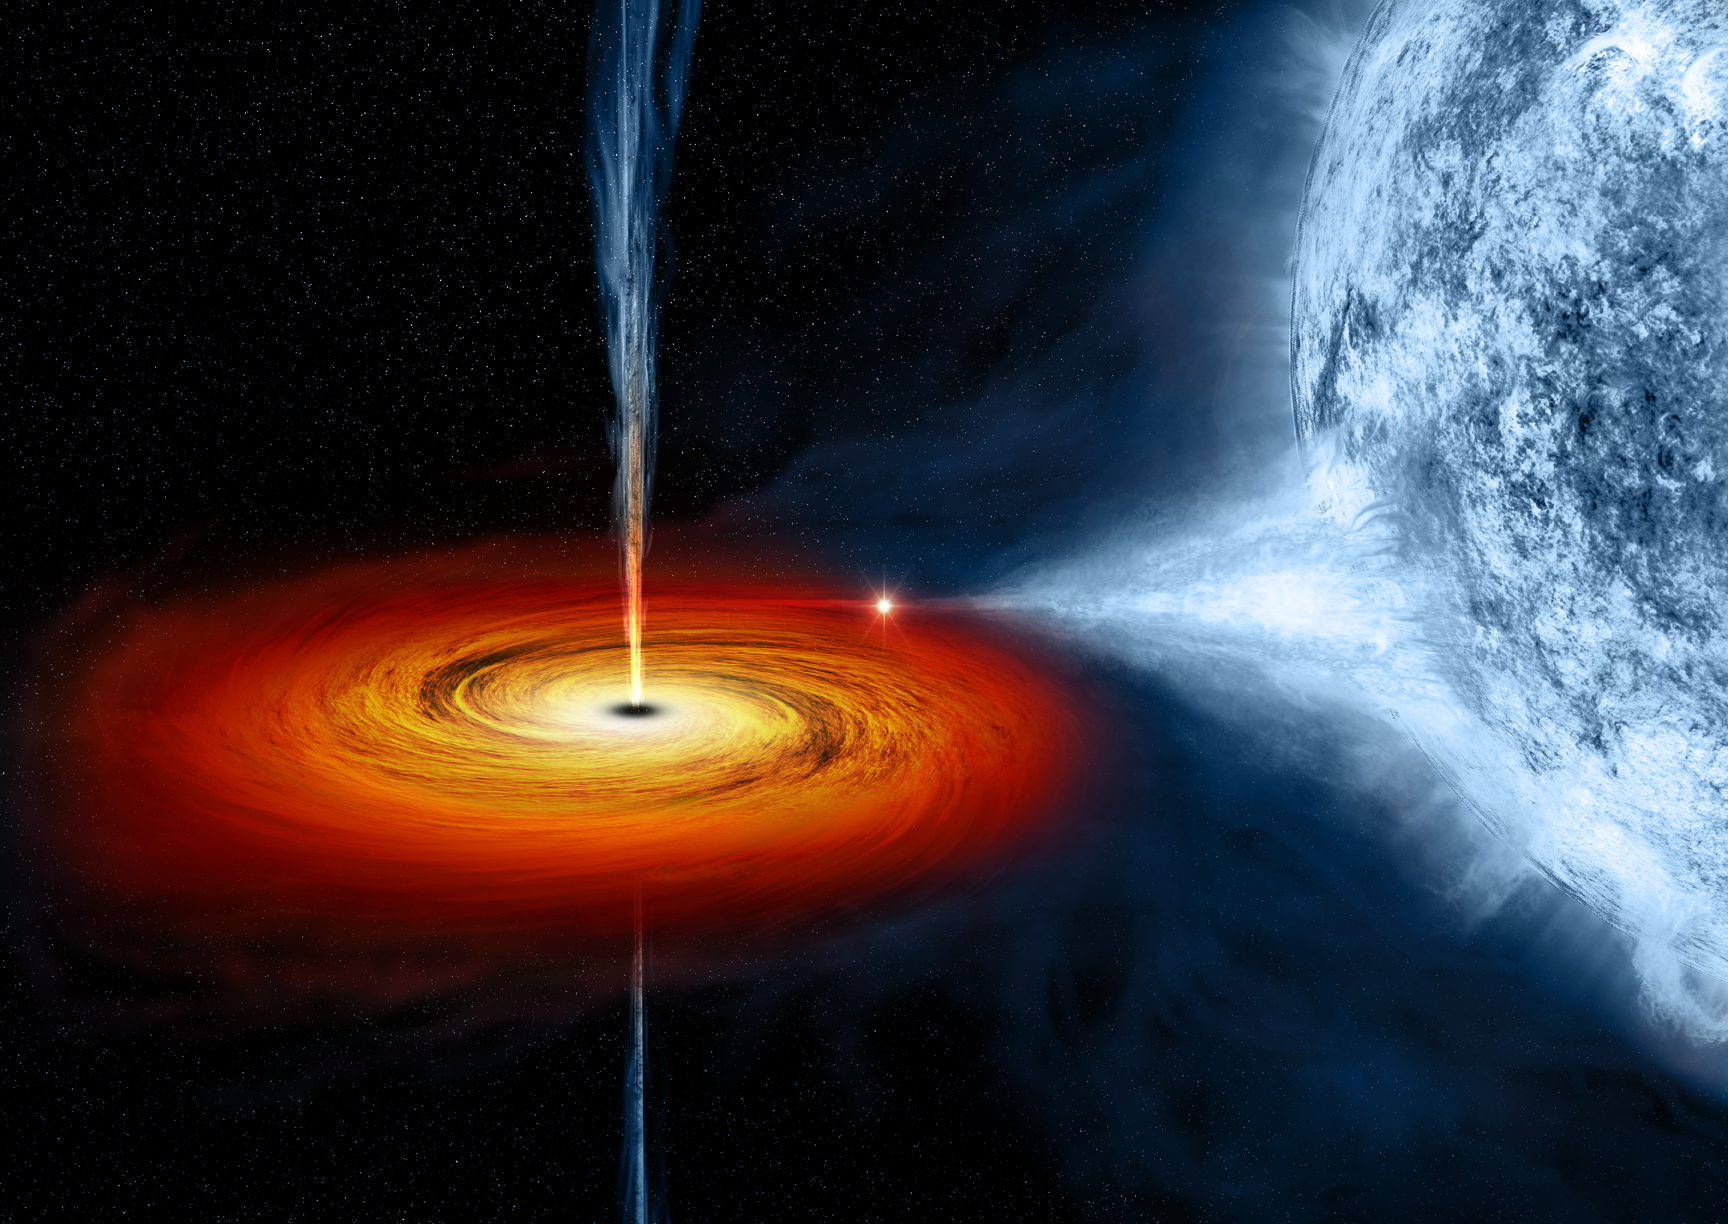 http://www.nasa.gov/audience/forstudents/k-4/stories/nasa-knows/what-is-a-black-hole-k4.html